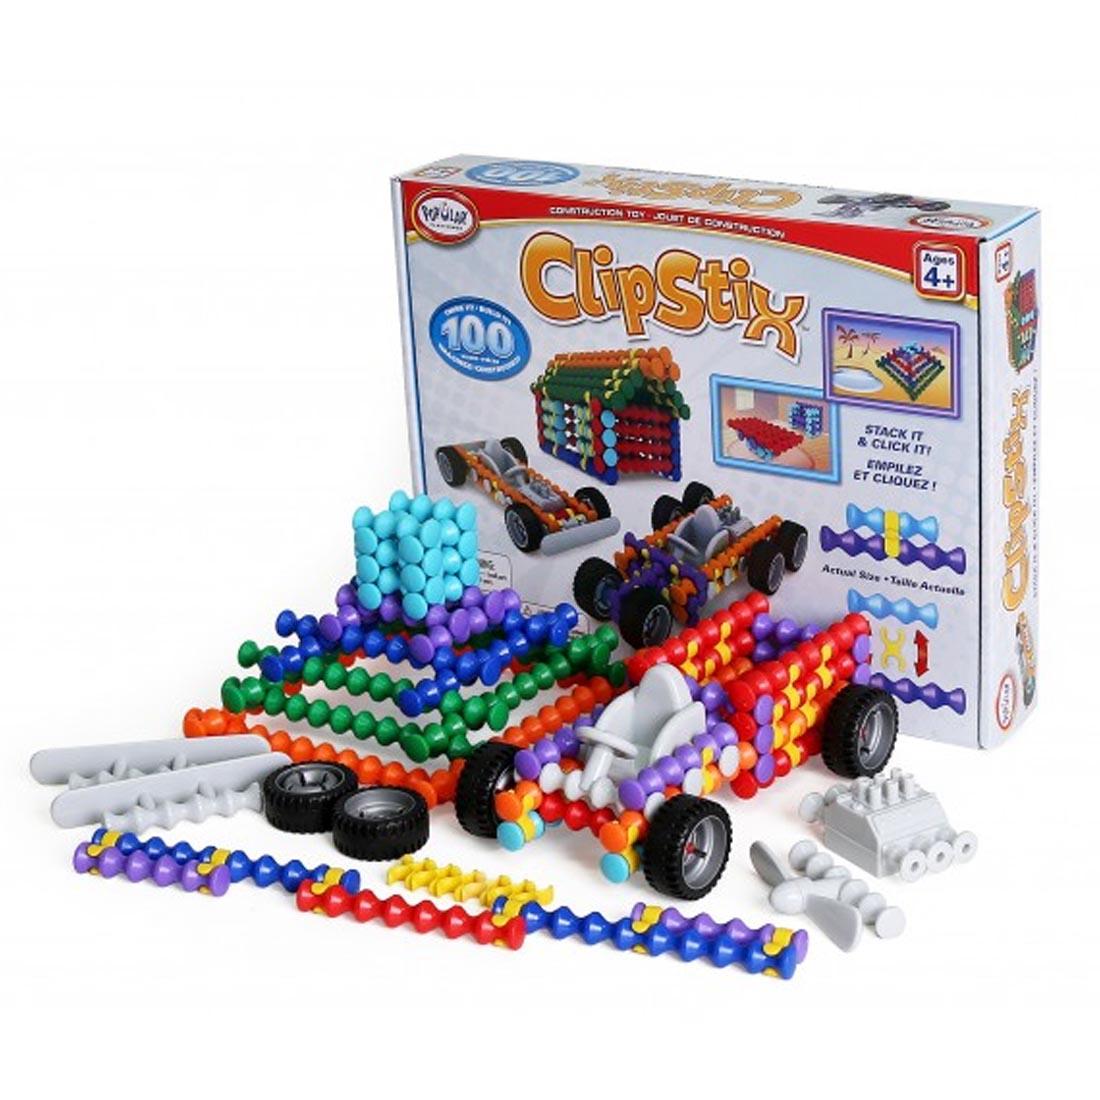 Clipstix 100-Piece Set By Popular Playthings shown with some pieces already built